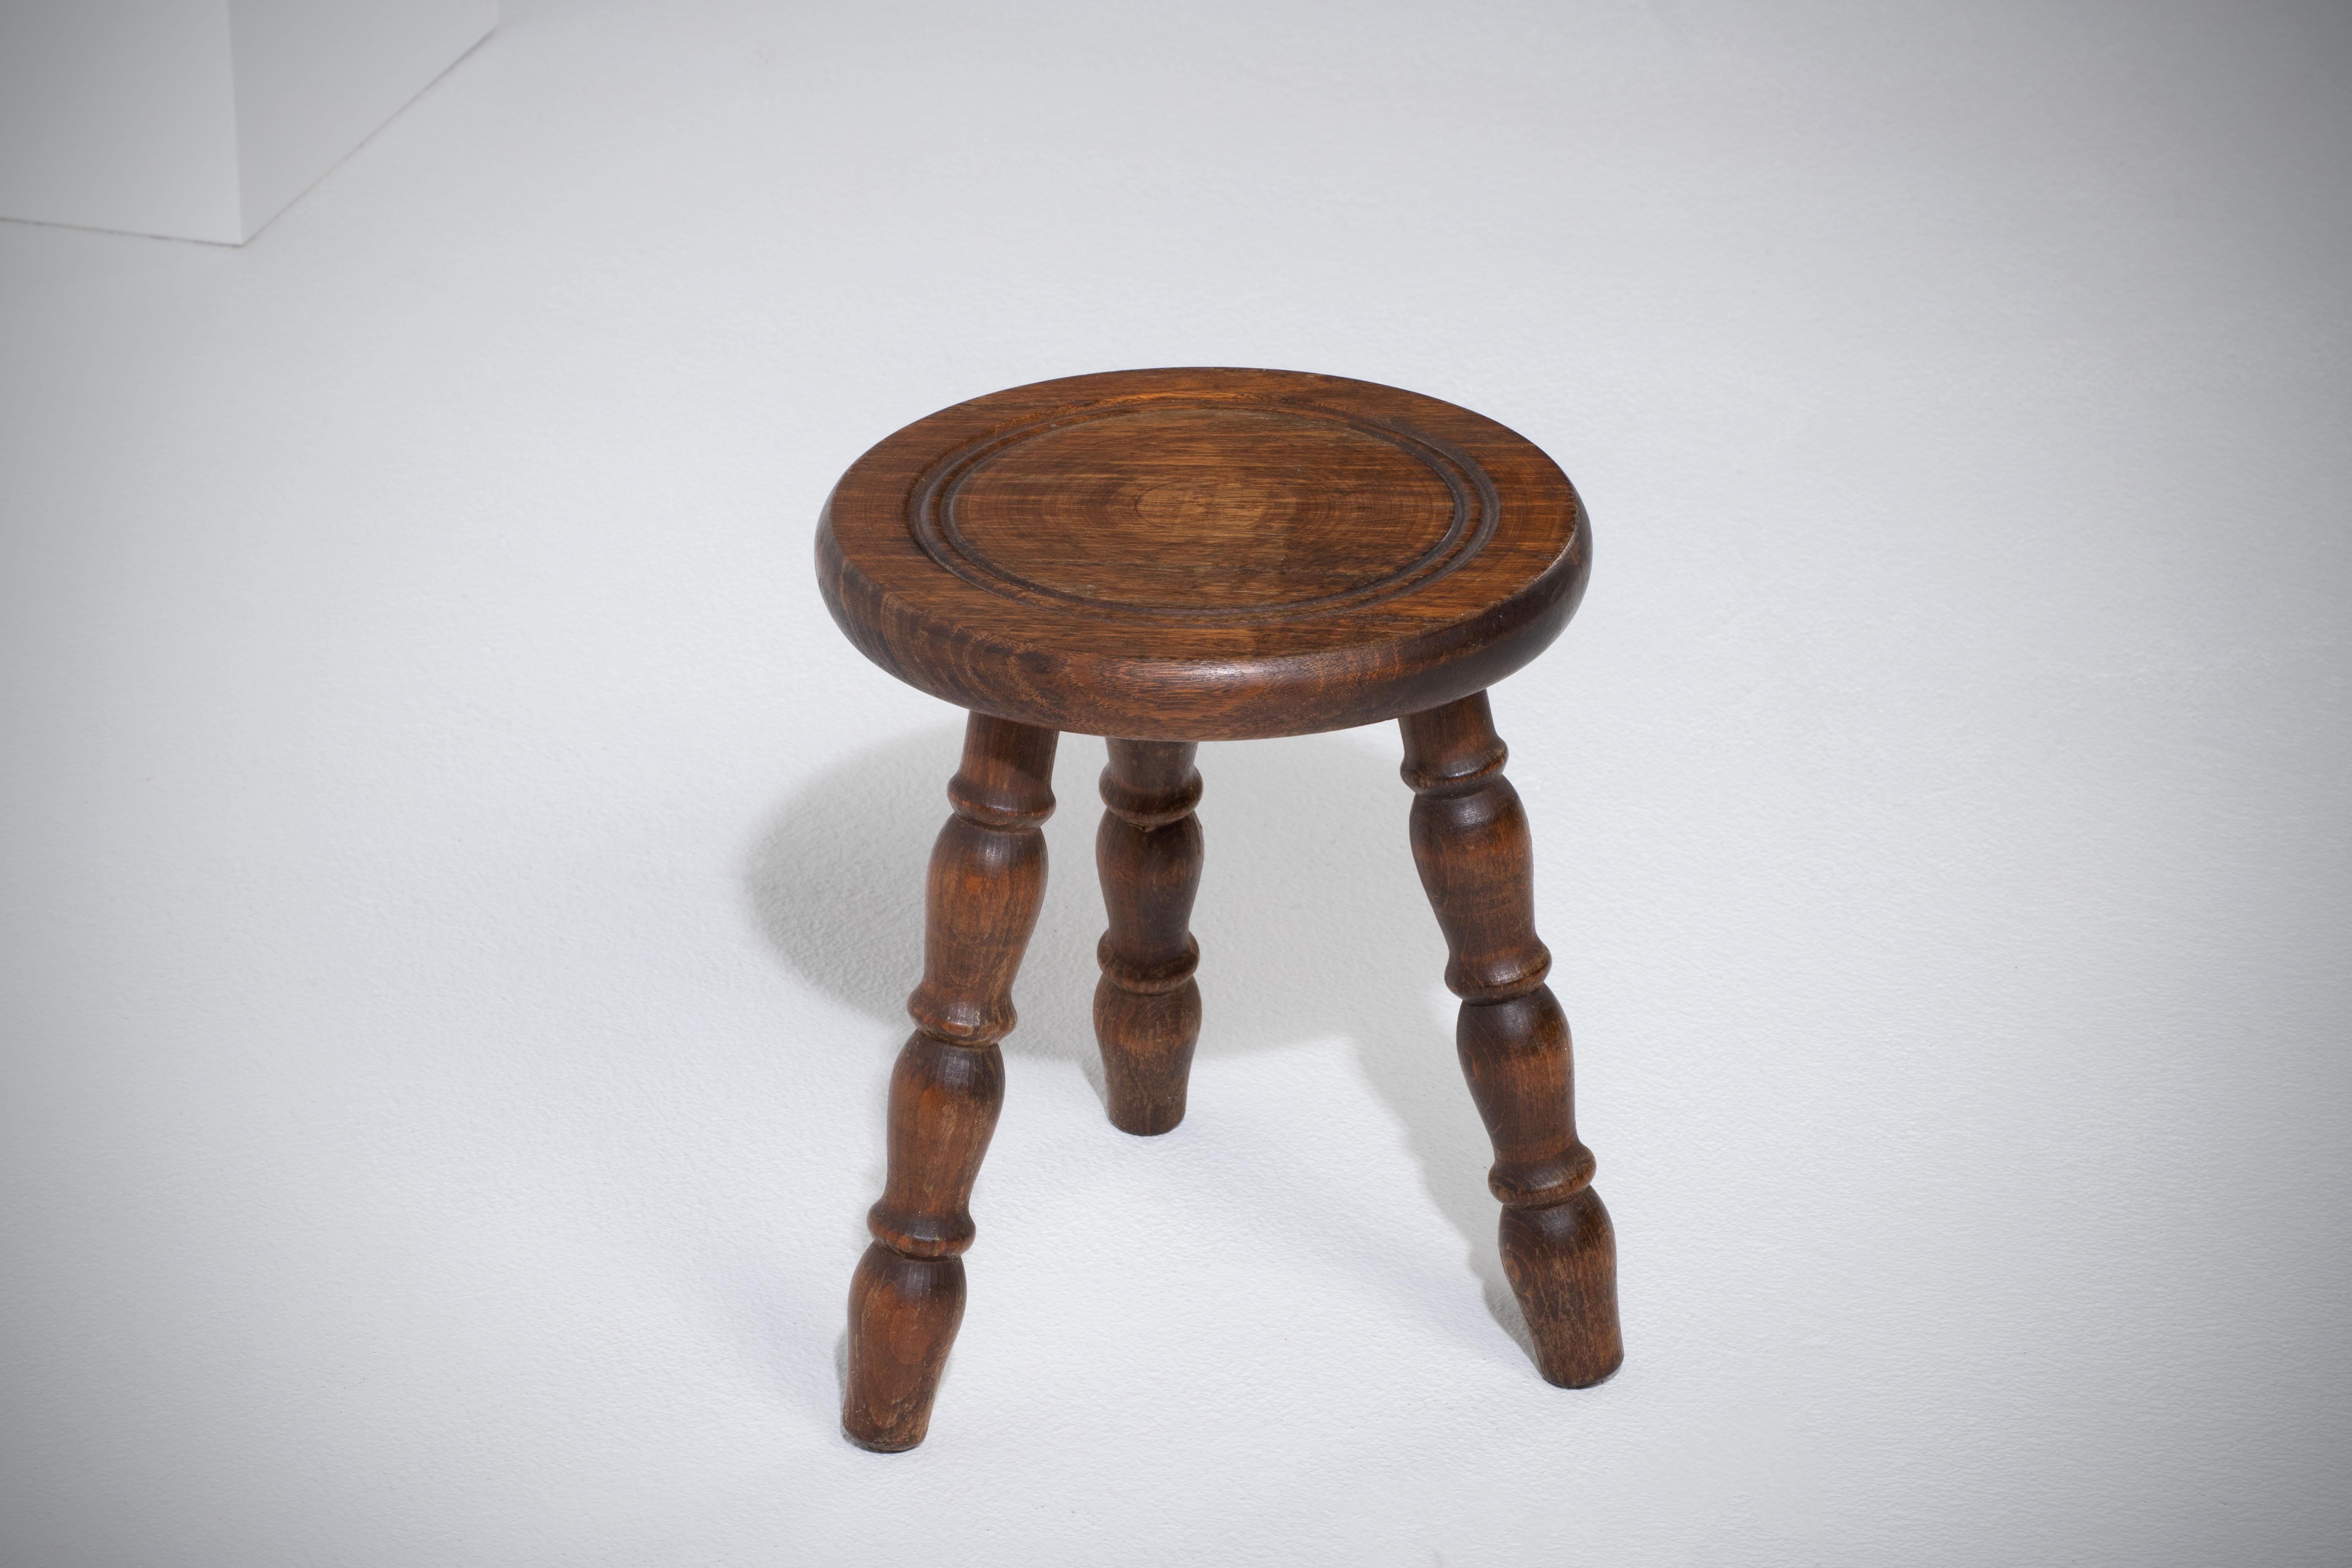 Midcentury Oak Stool with Turned Wood Legs, 1960s, France In Good Condition For Sale In Wiesbaden, DE